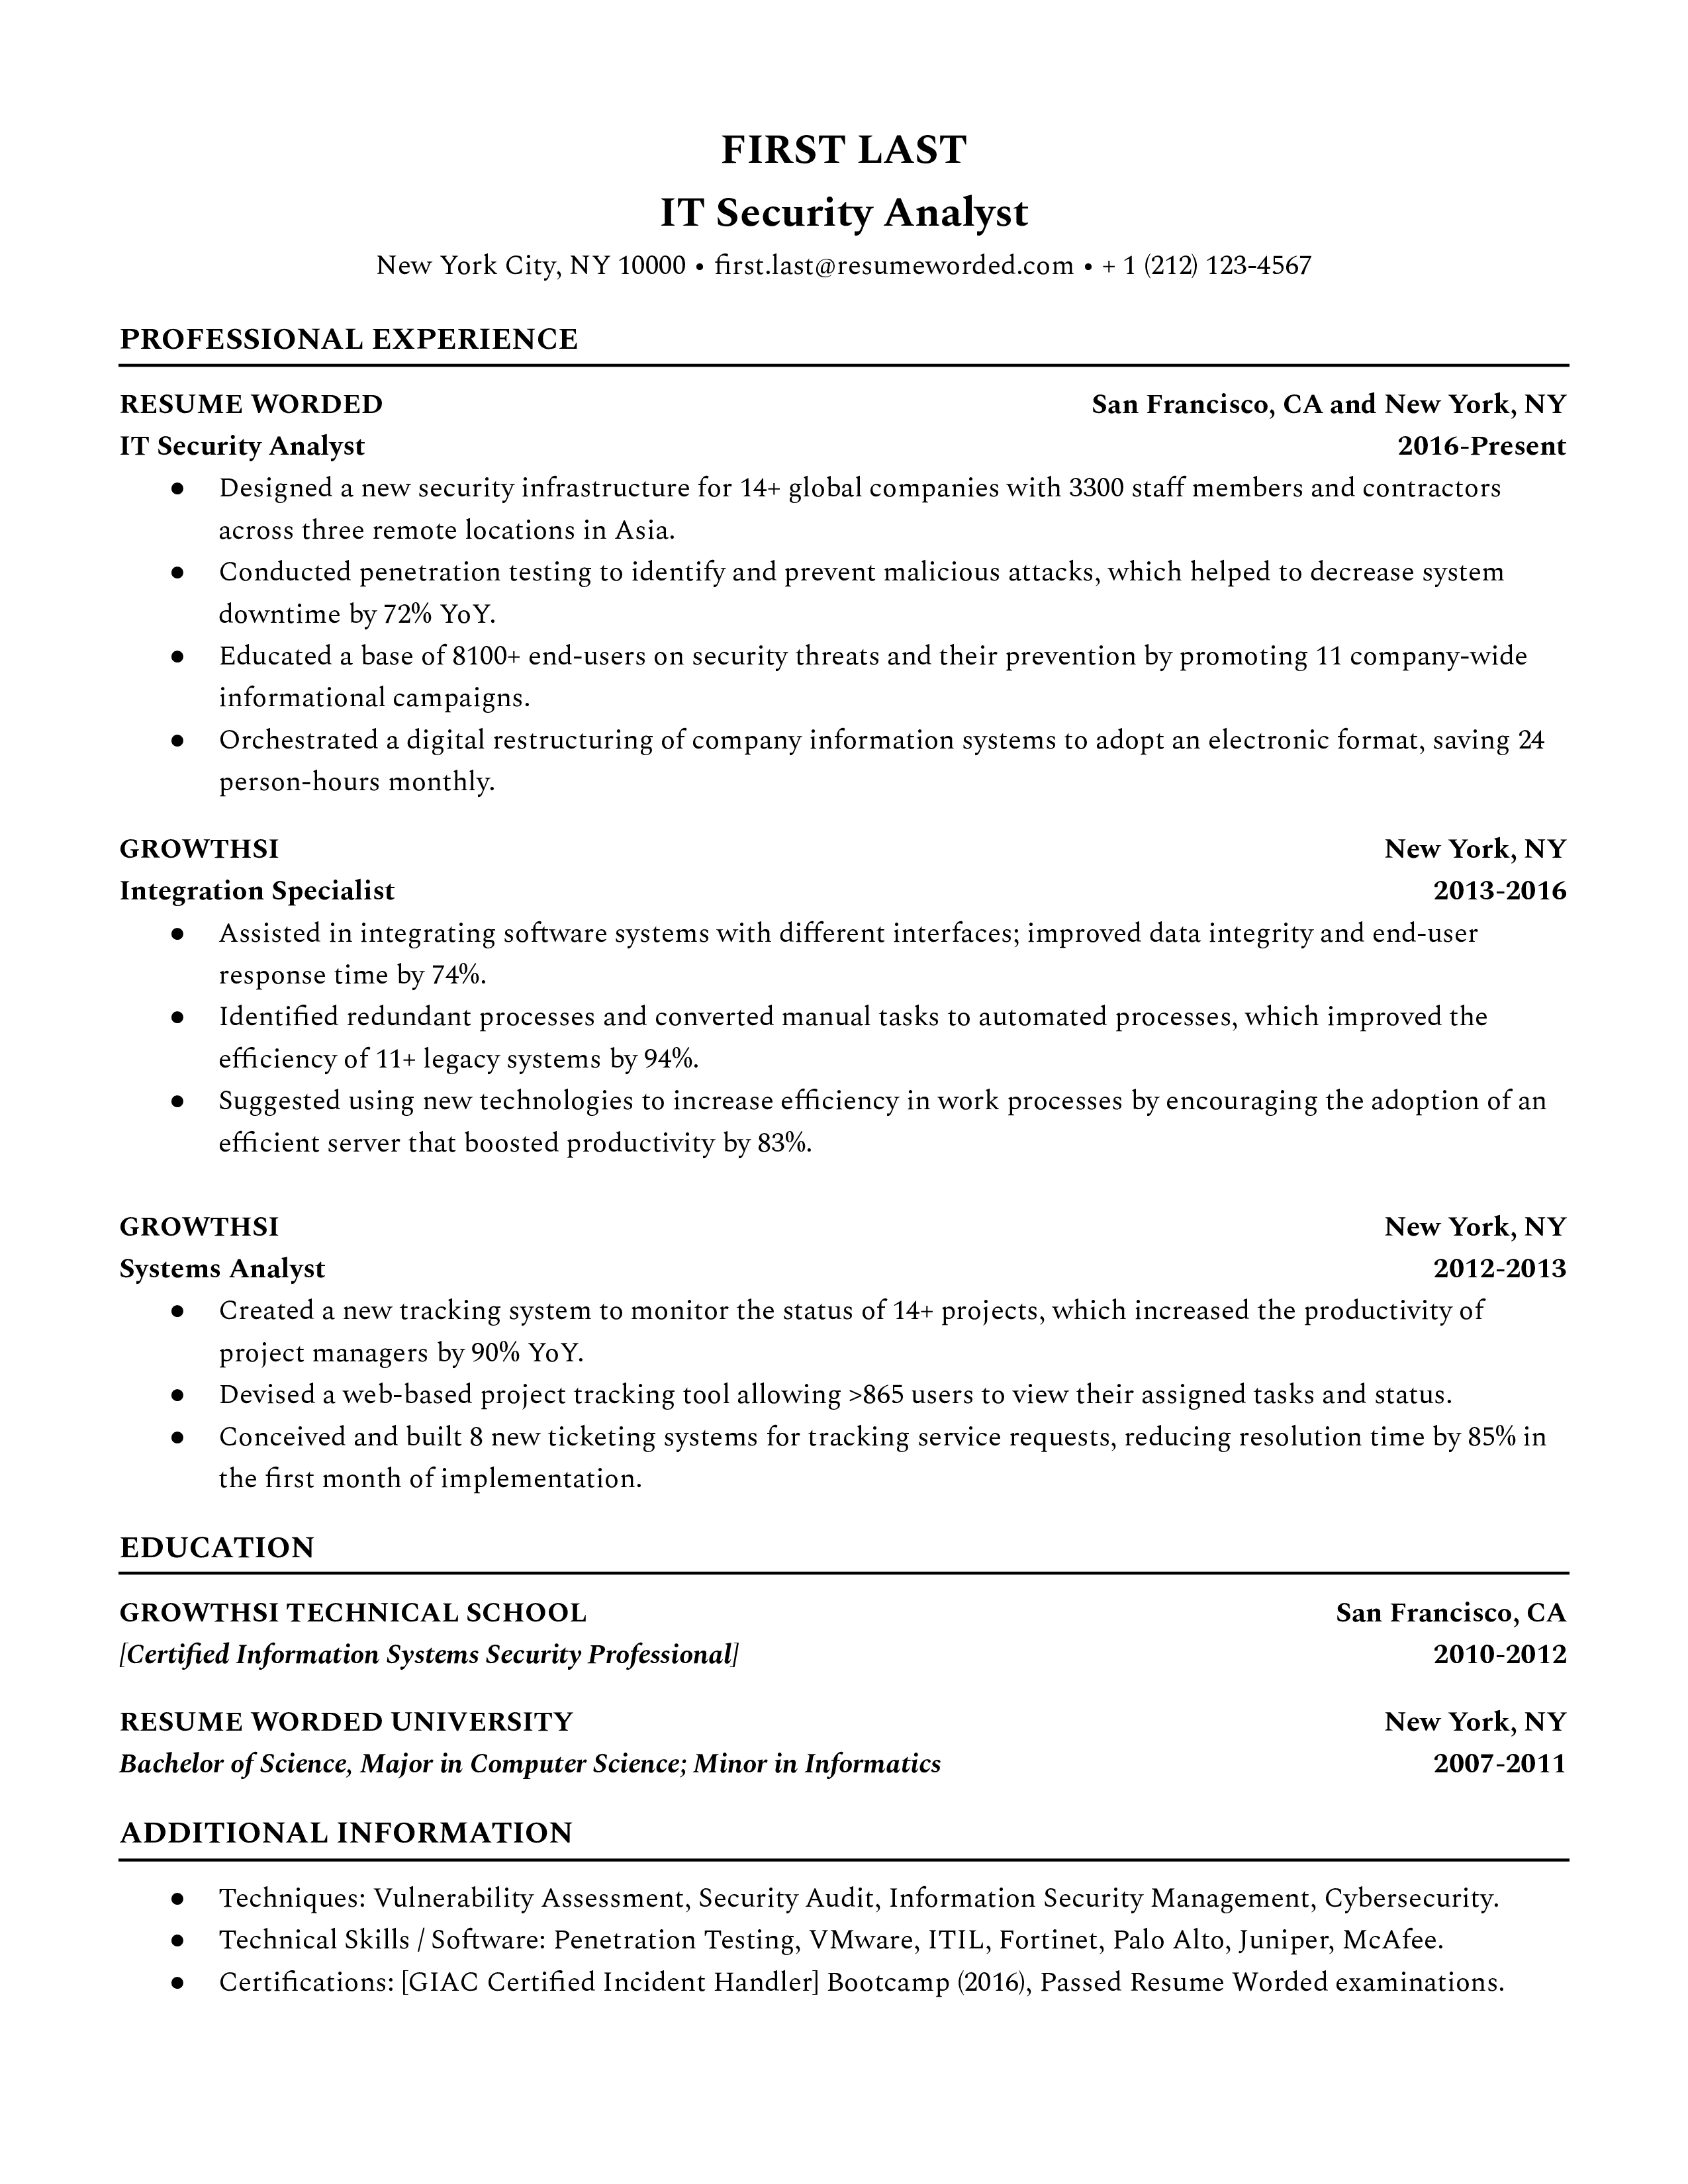 An IT security analyst resume template prioritizing work experience.